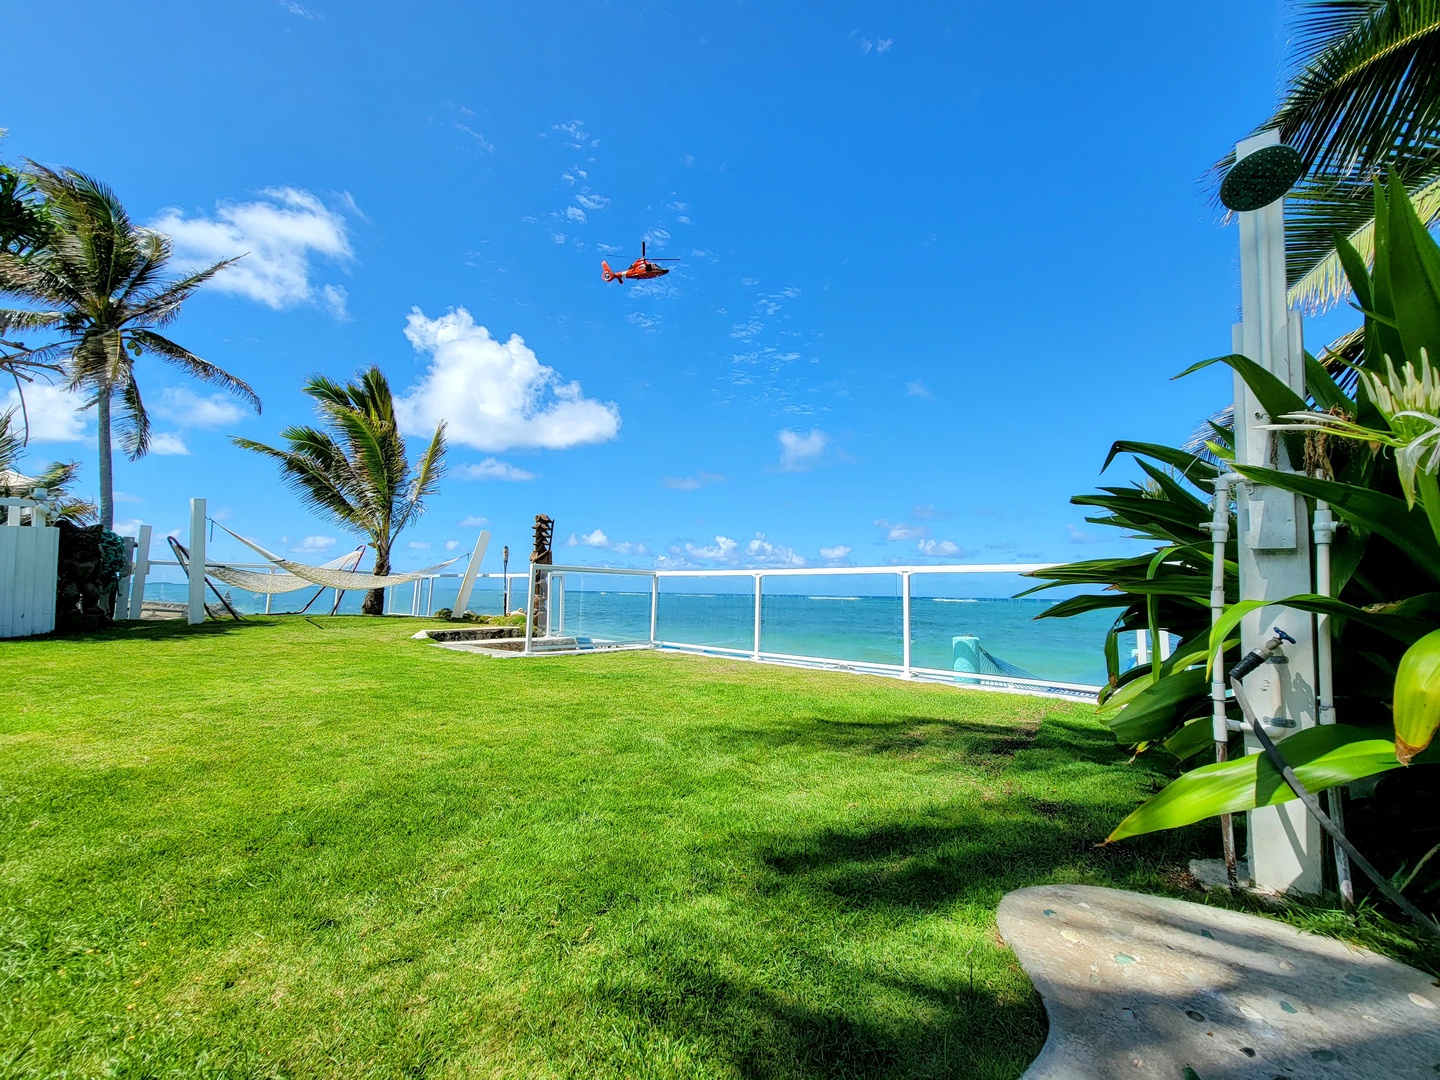 Hauula Vacation Rentals, Paradise Reef Retreat - Feel the island sunshine and breeze